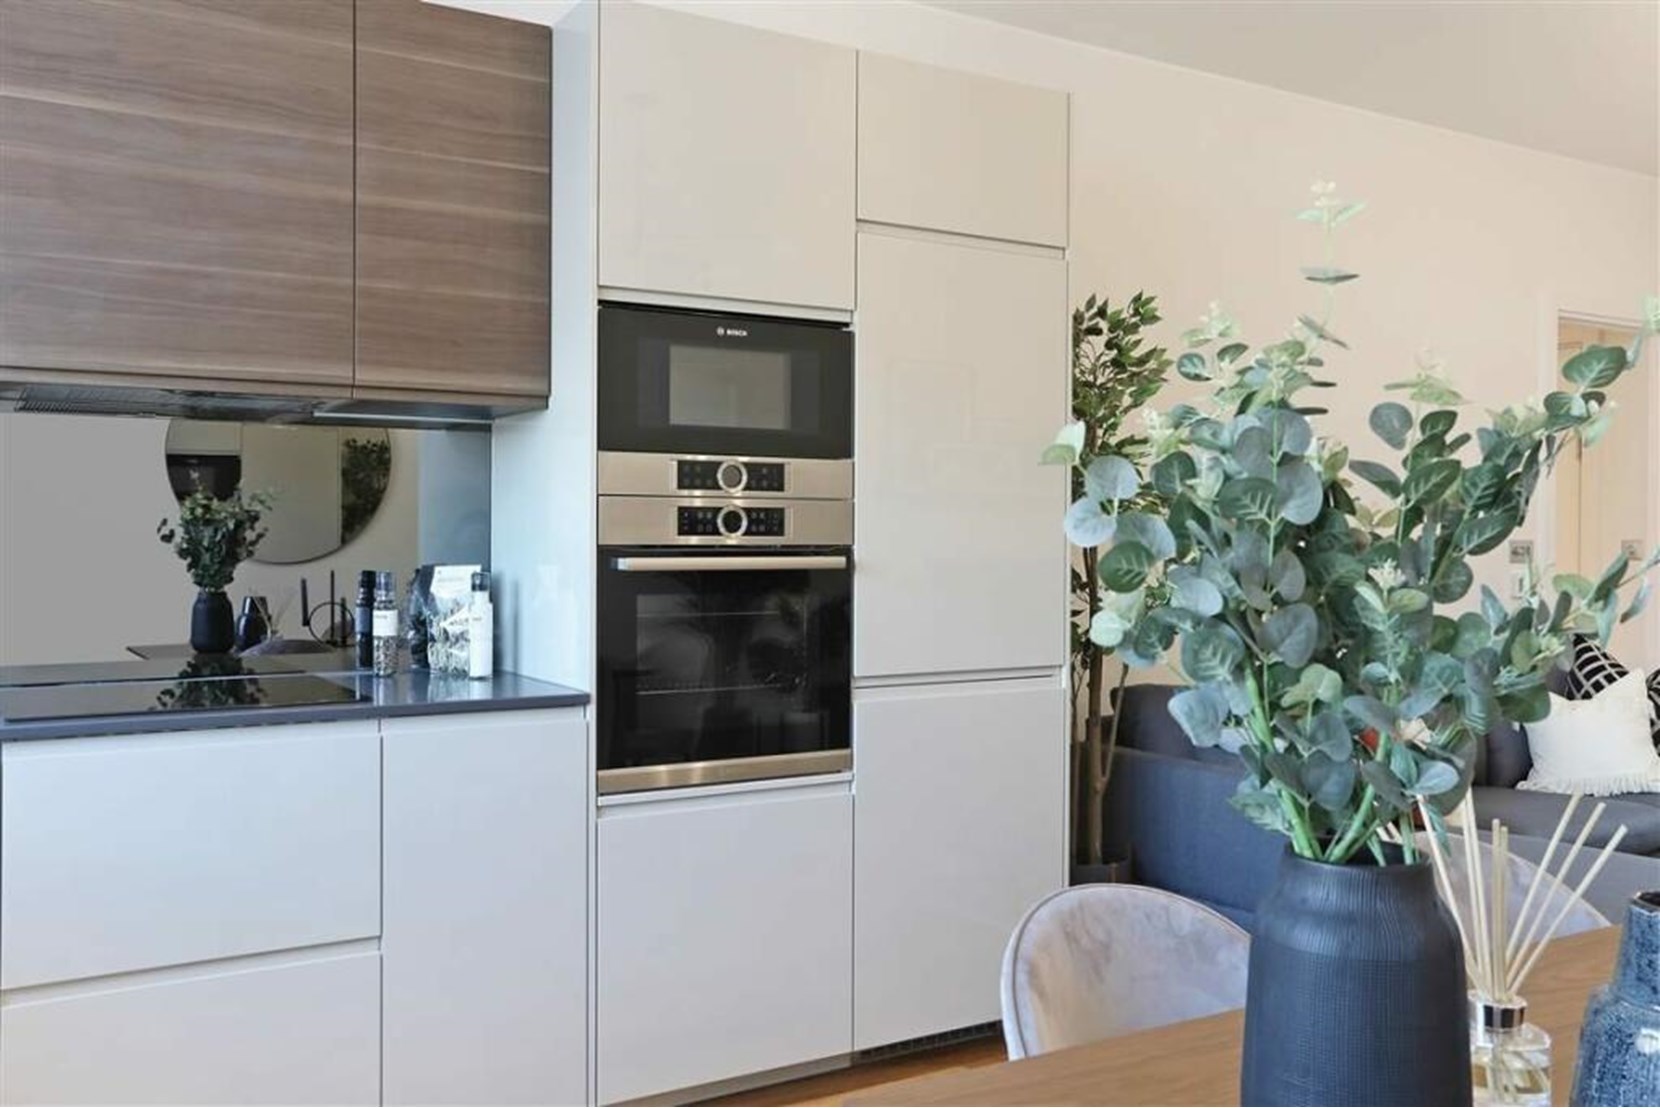 Houses and Apartments to Rent by JLL at Sugar House Island, Newham, E15, kitchen